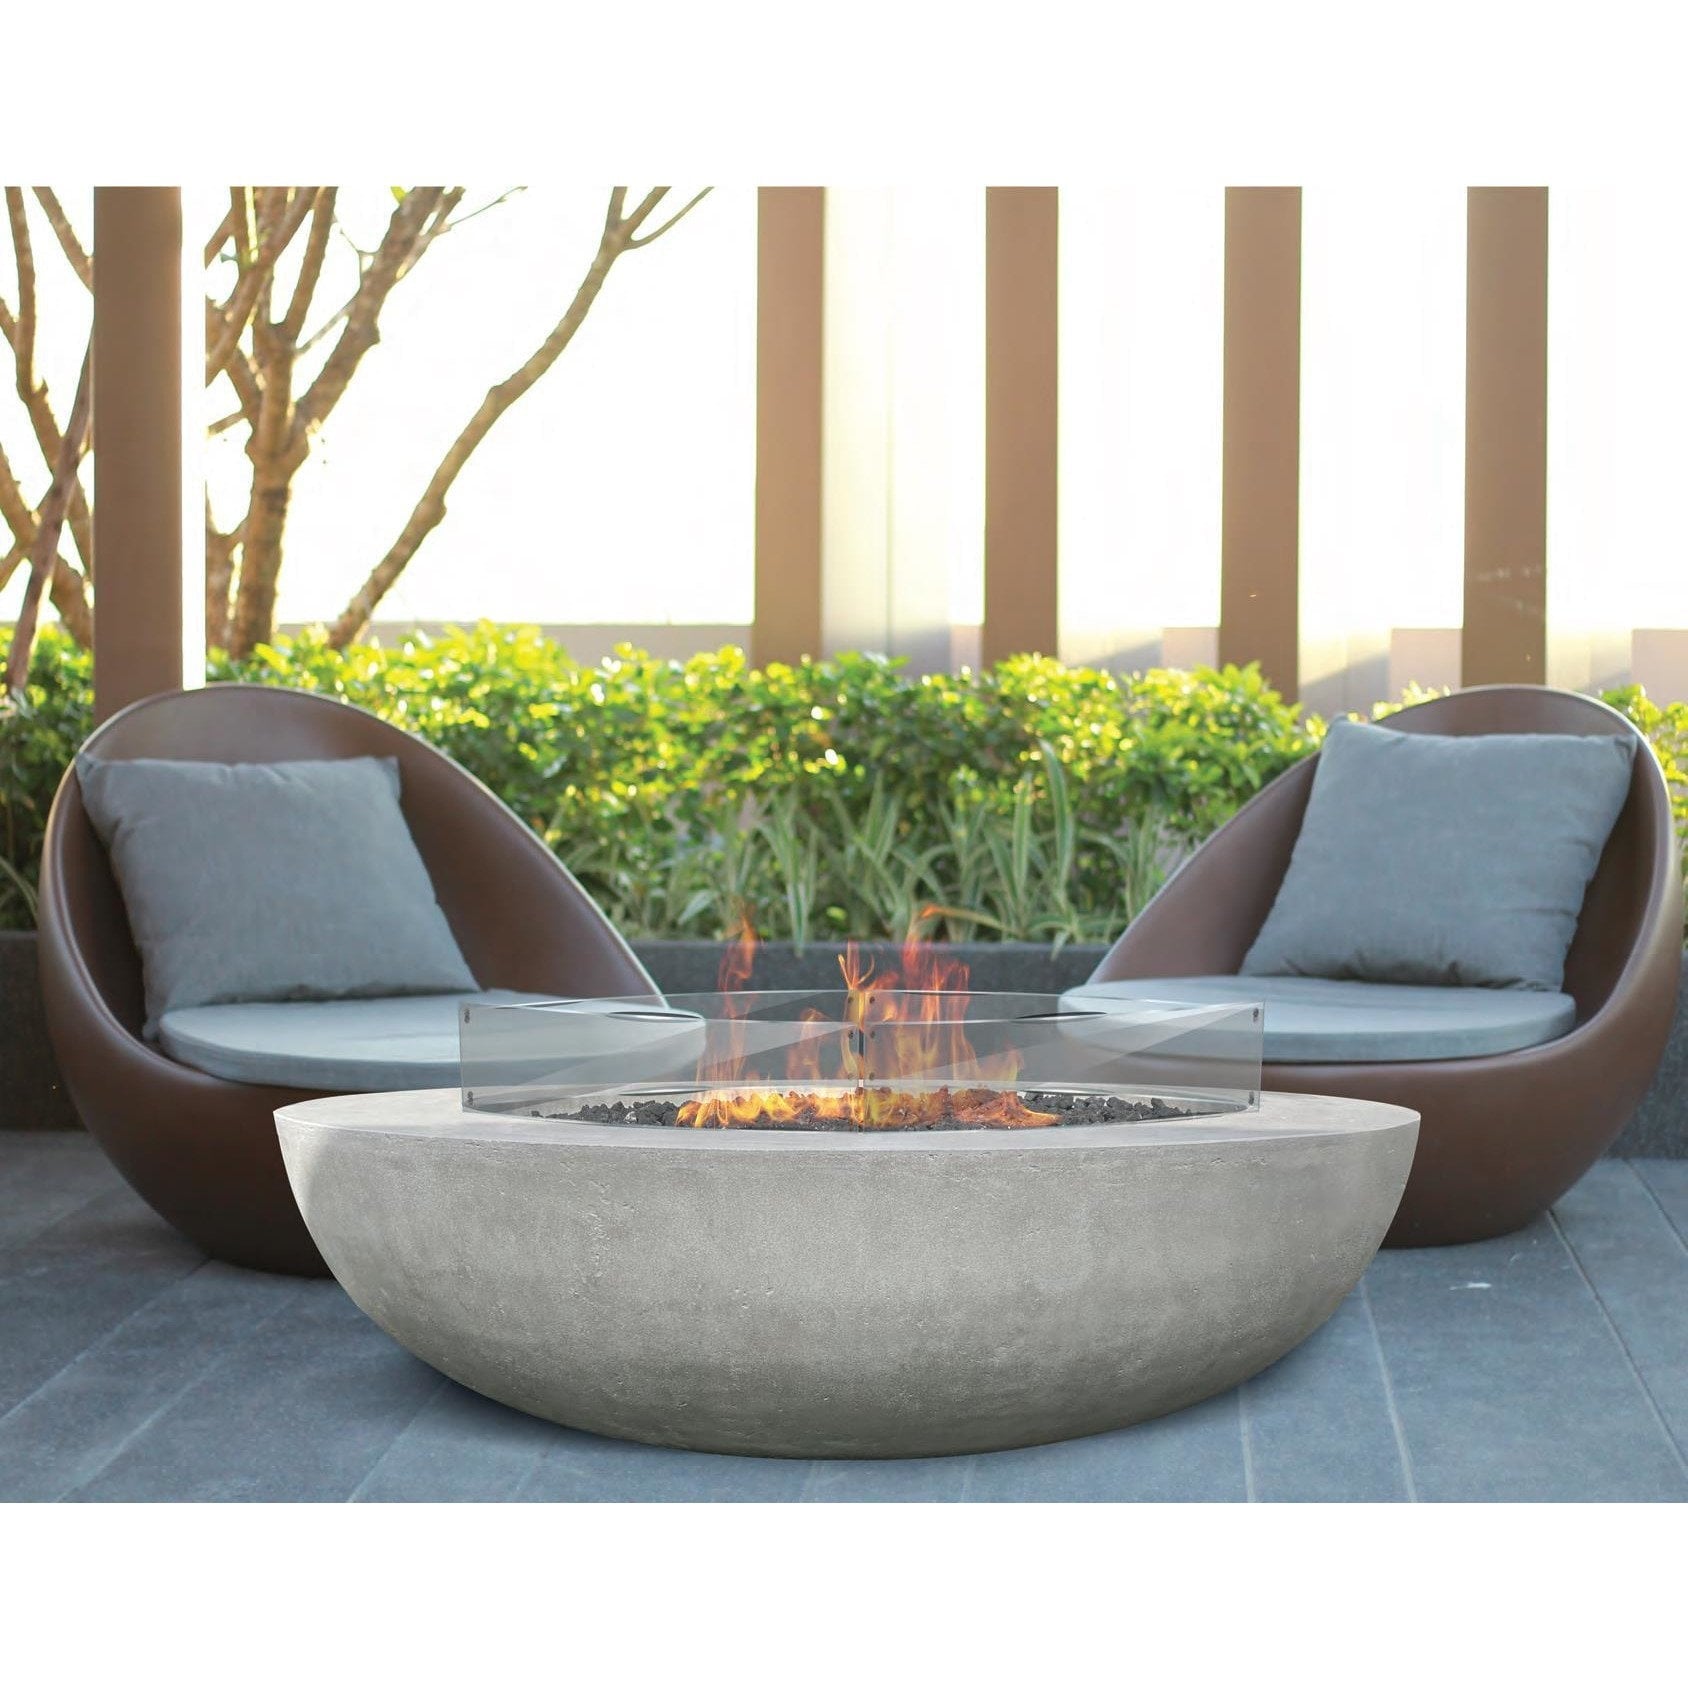 DRAFT Prism Hardscapes - Moderno 70 Fire Bowl in GFRC Concrete - Match Lit - Majestic Fountains